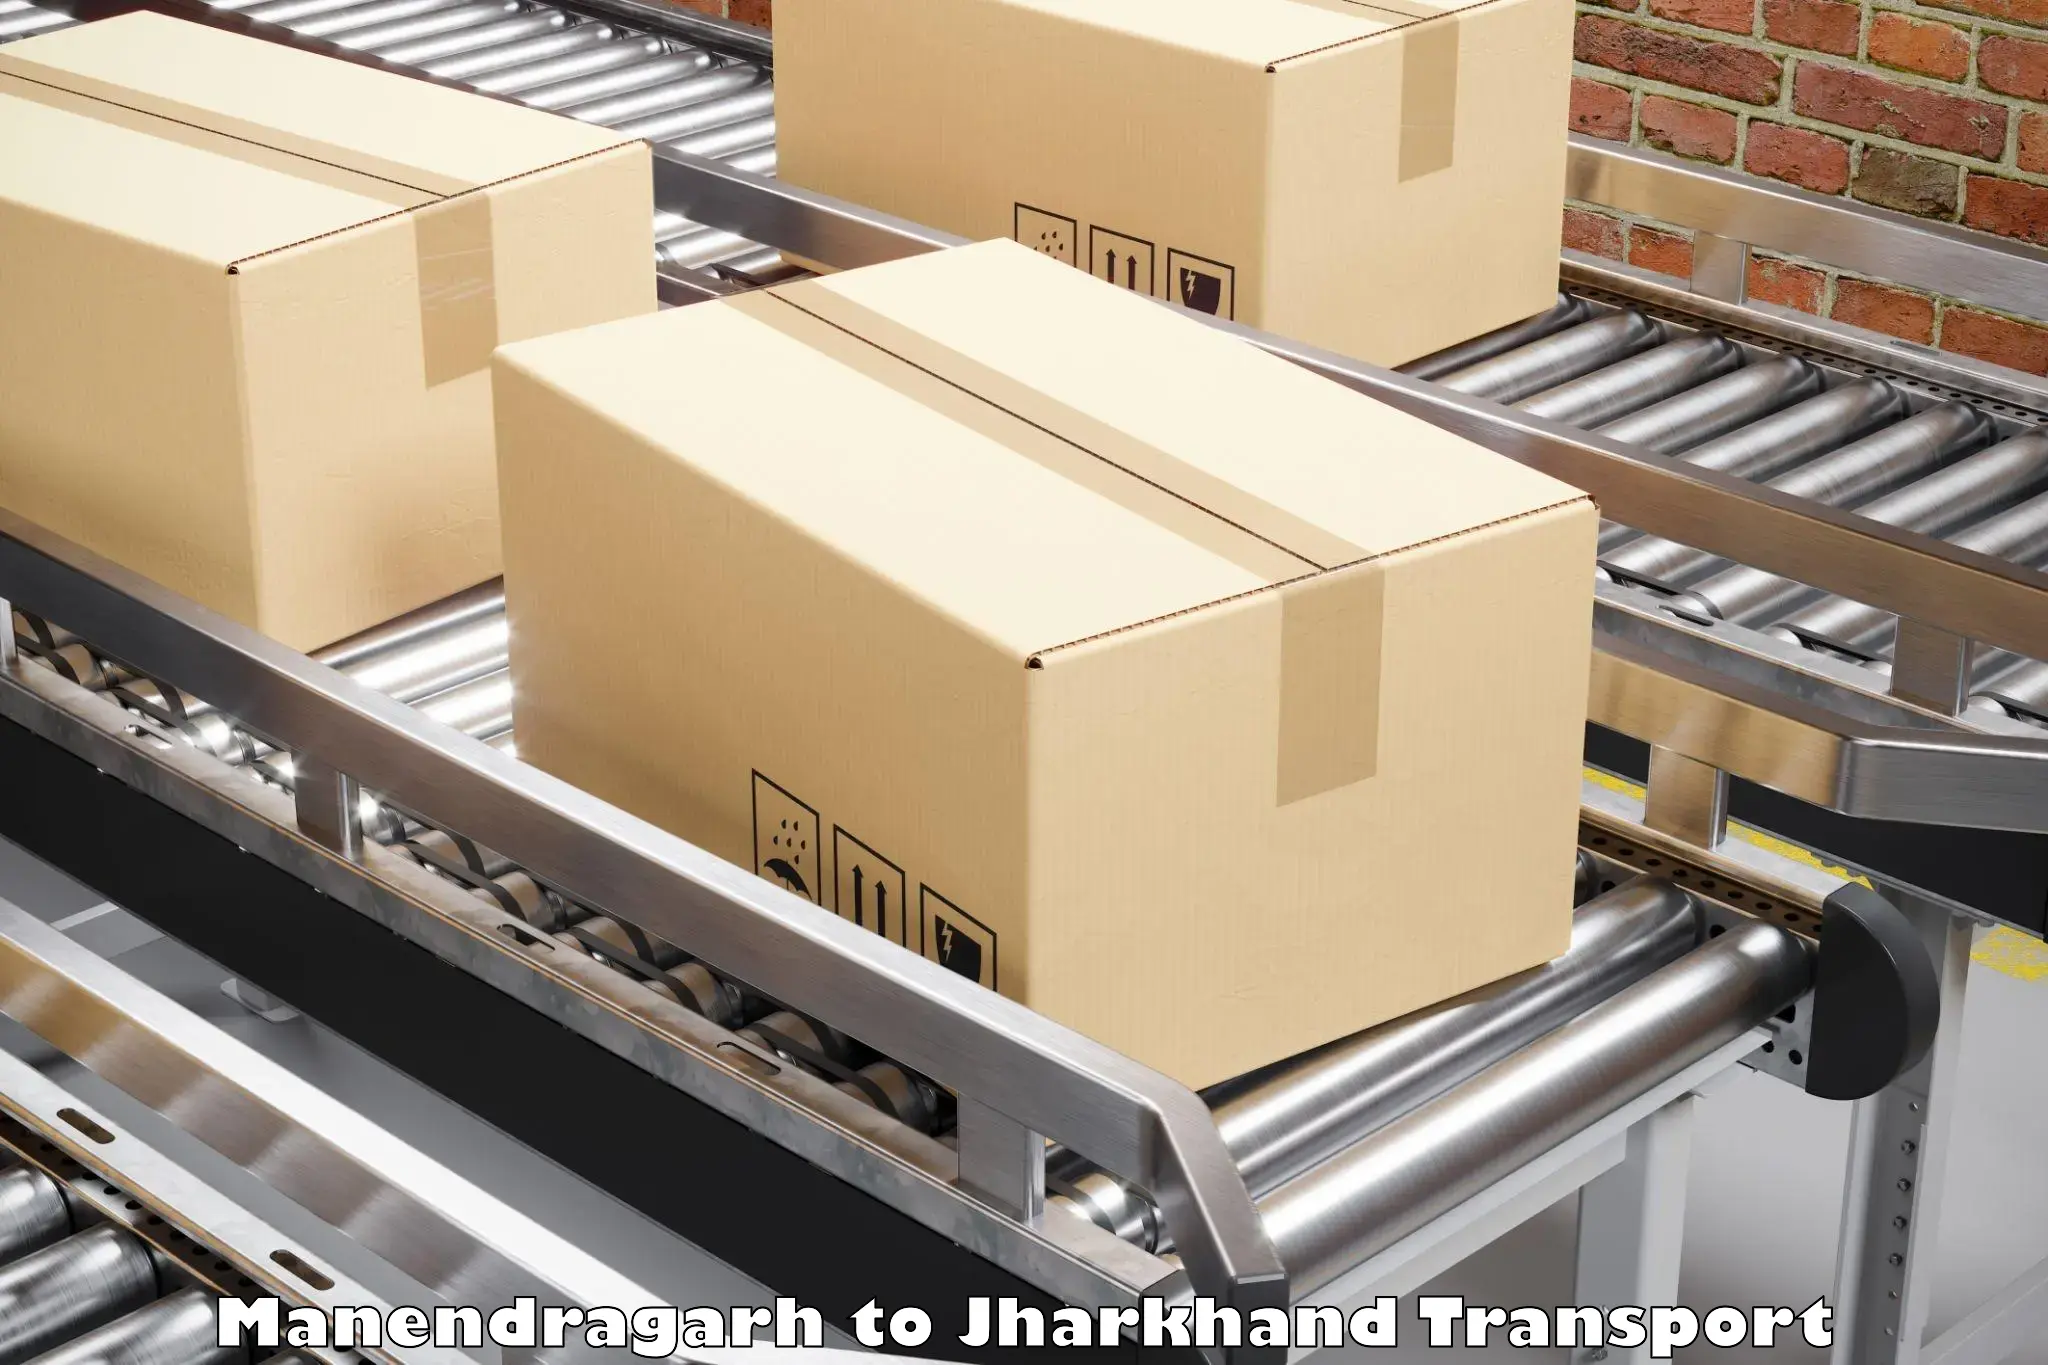 Goods delivery service Manendragarh to Dhanbad